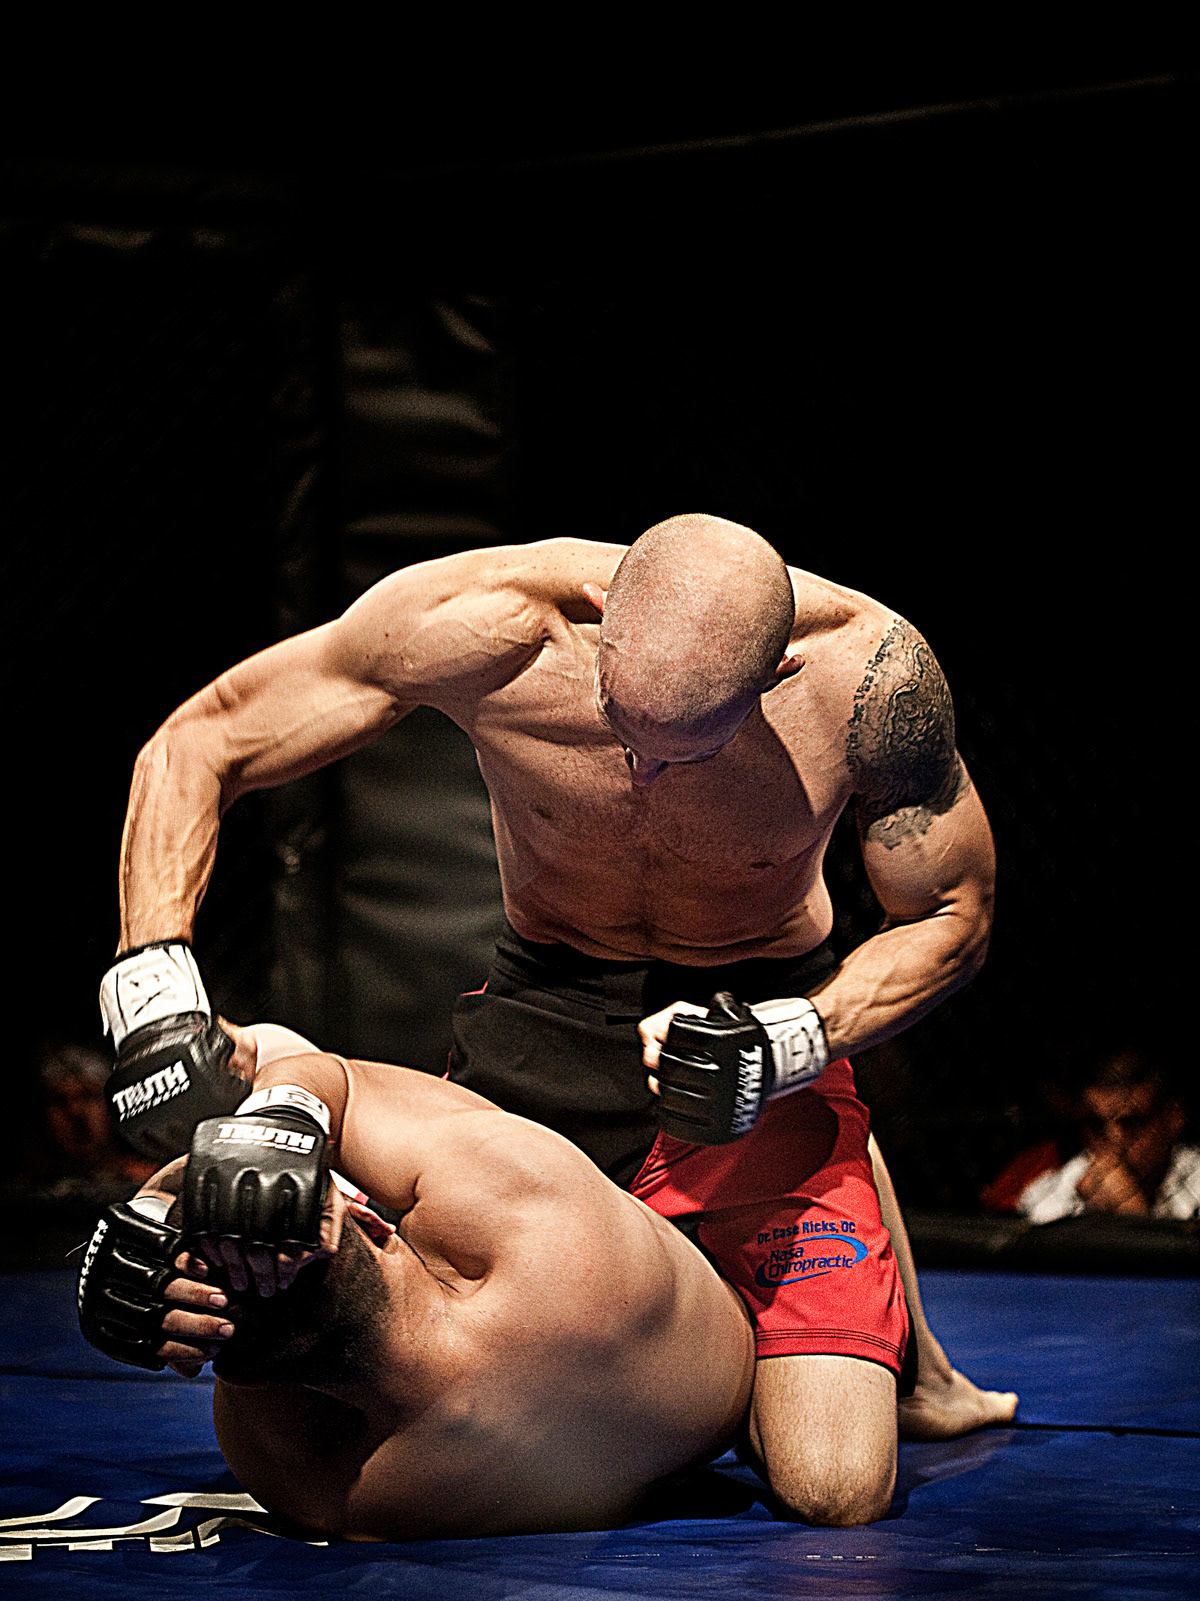 MMA houston fighting sports cage Boxing Wrestling